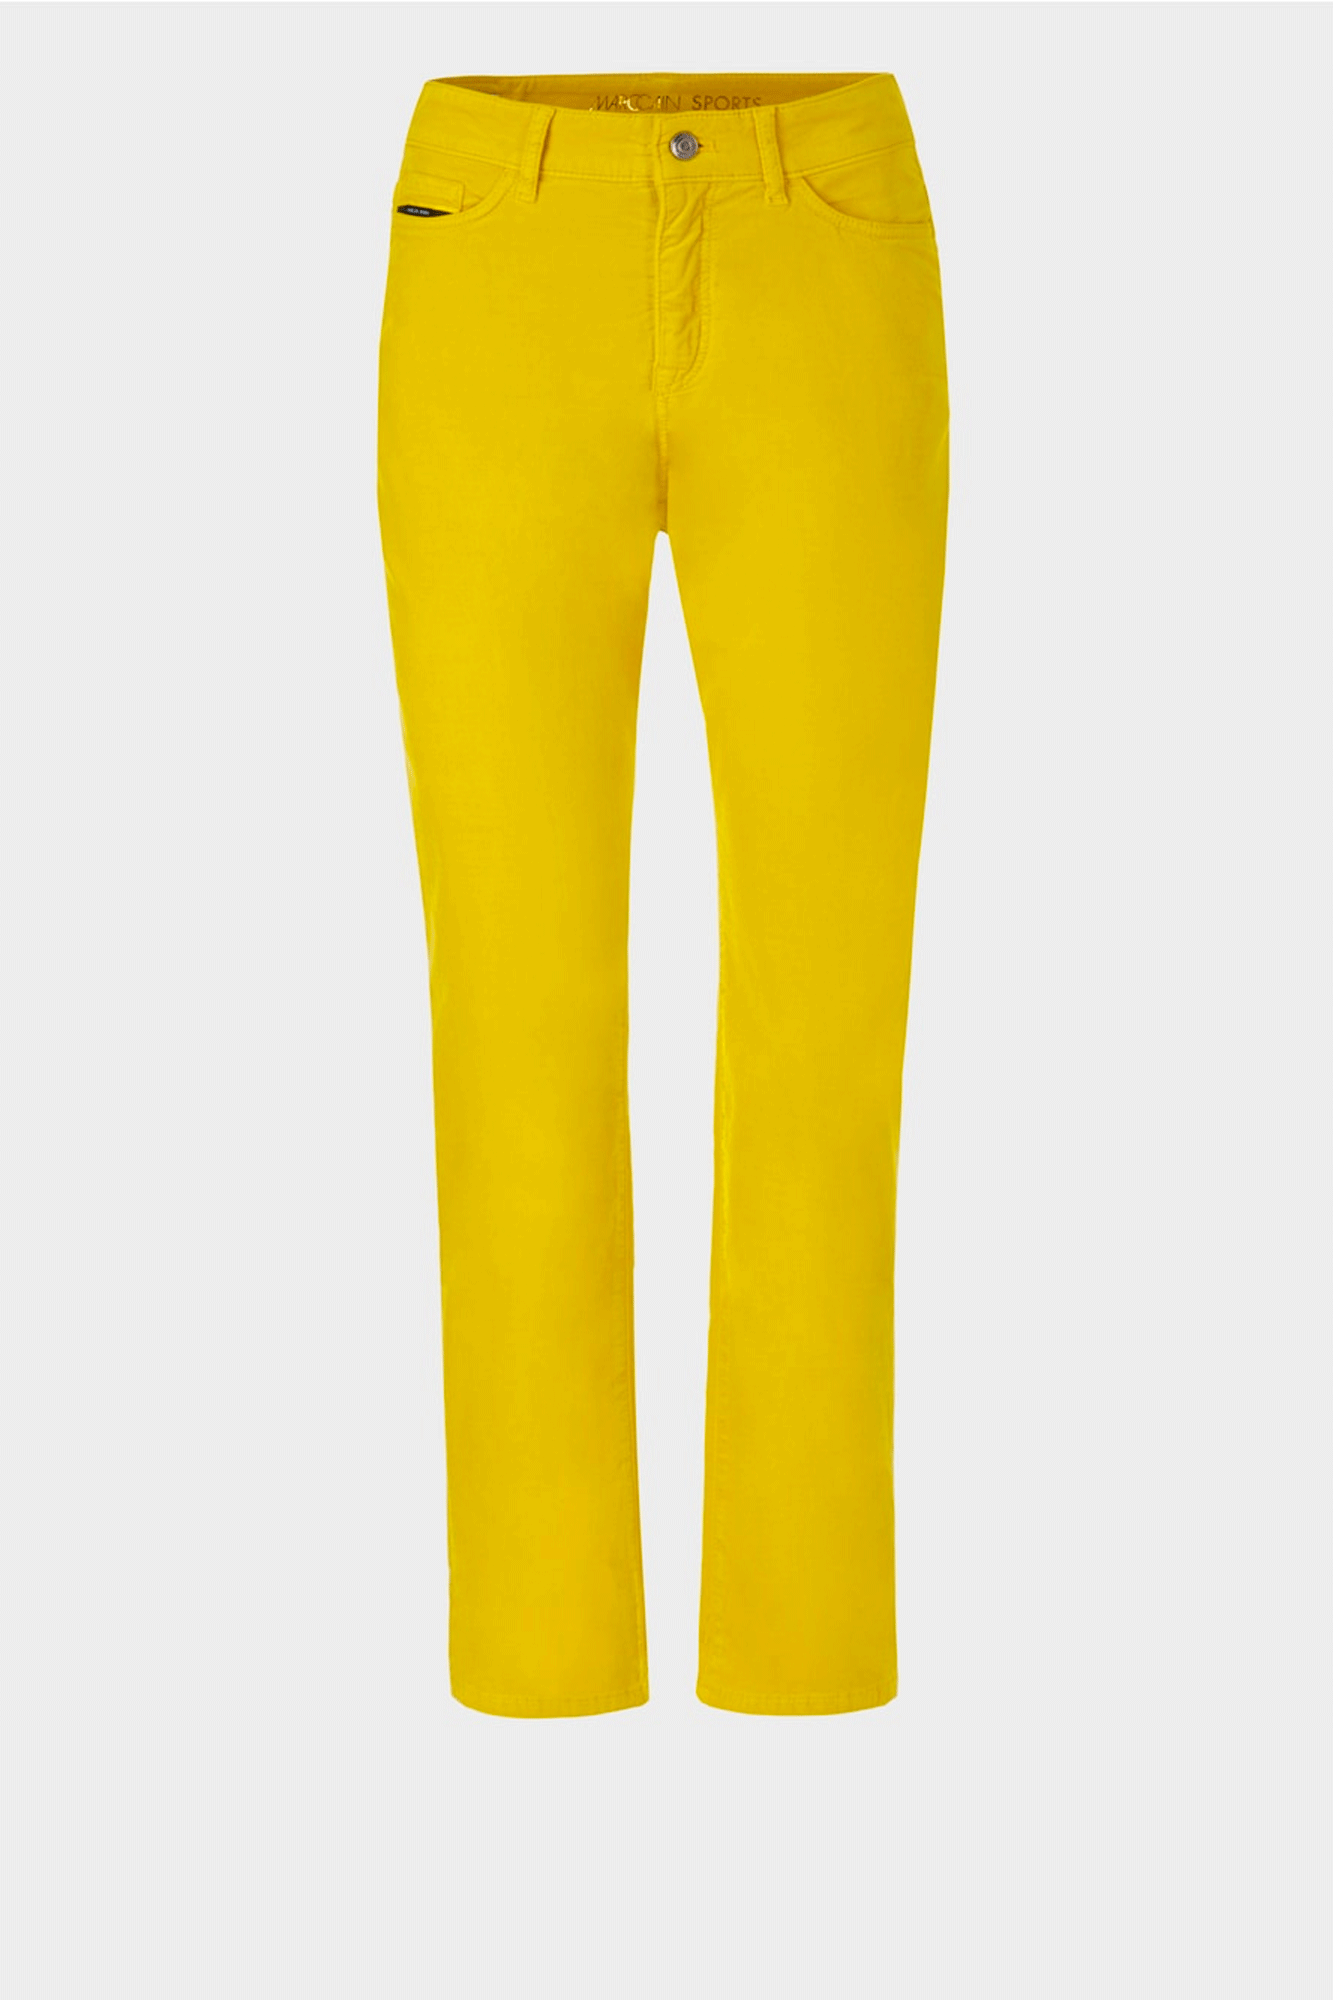 Constructed from lightweight and durable fabric, the Relax Fit Snaky Star Pants from Marc Cain are designed for a comfortable fit. Featuring a five-pocket design and regular-height waistband, these pants will keep you looking stylish while providing superior comfort. With a relaxed cut and 7/8 length legs, these pants offer the perfect balance of style and practicality.